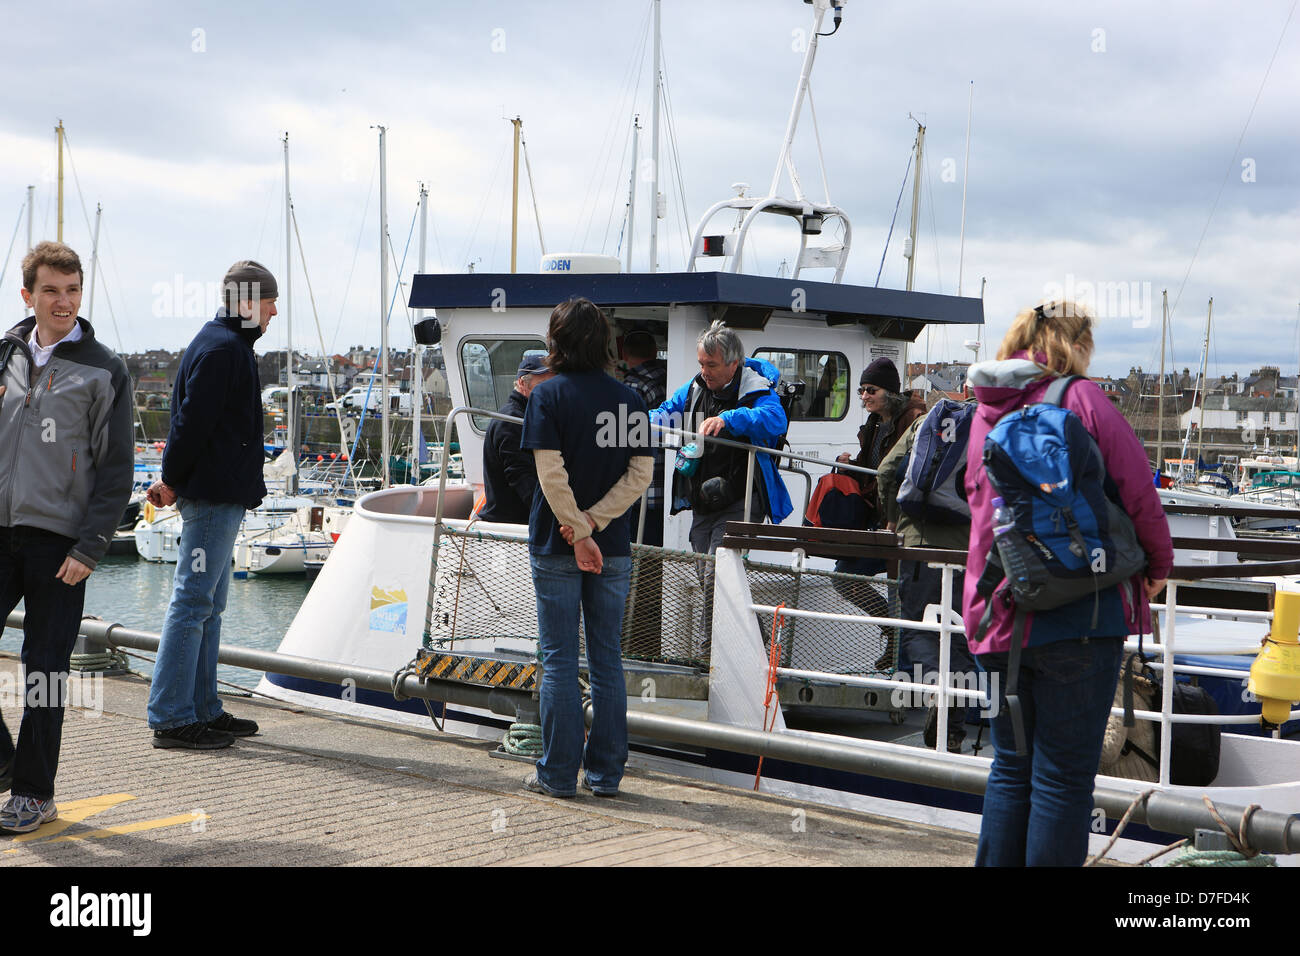 People disembarking from The May Princess at Anstruther in Fife Scotland following a day trip to the Isle of May Stock Photo